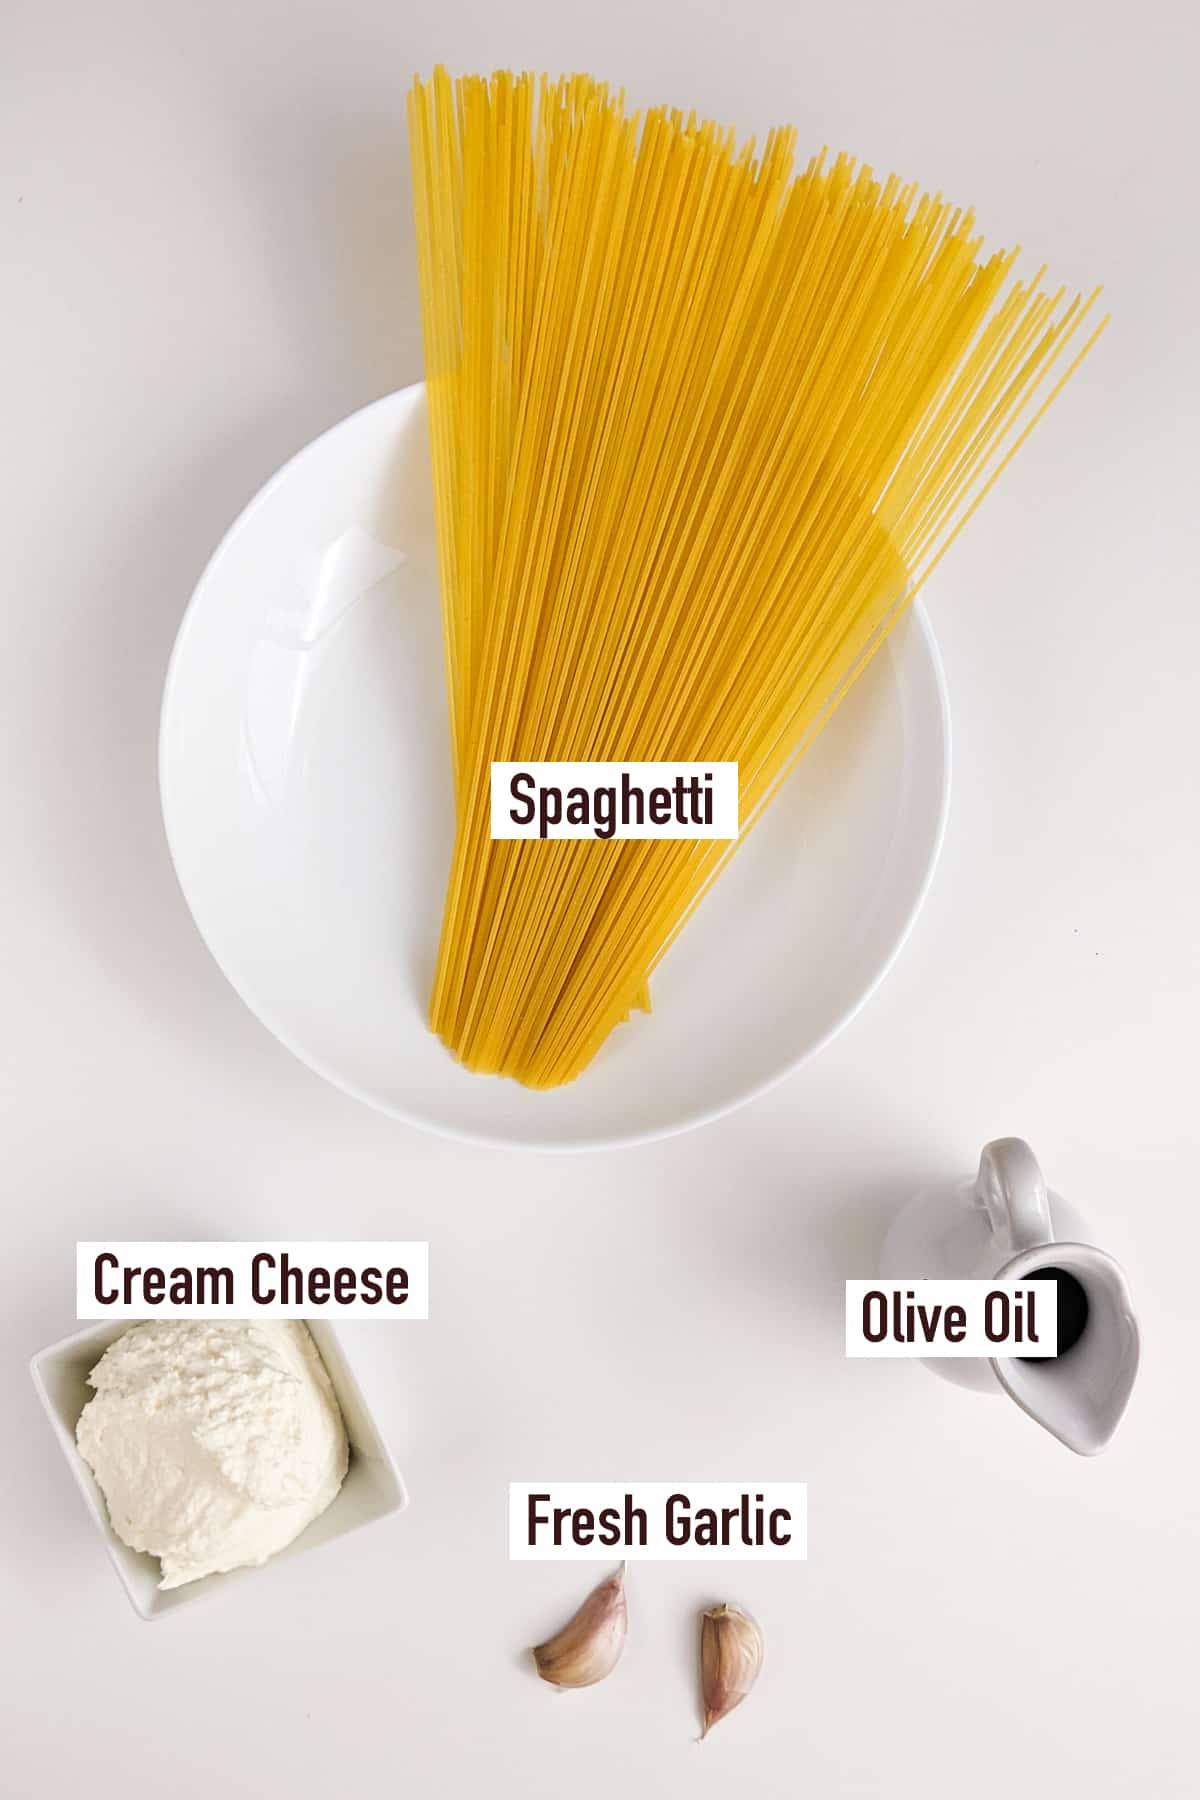 Top view of a white plate with spaghetti, cream cheese, fresh garlic and olive oil.